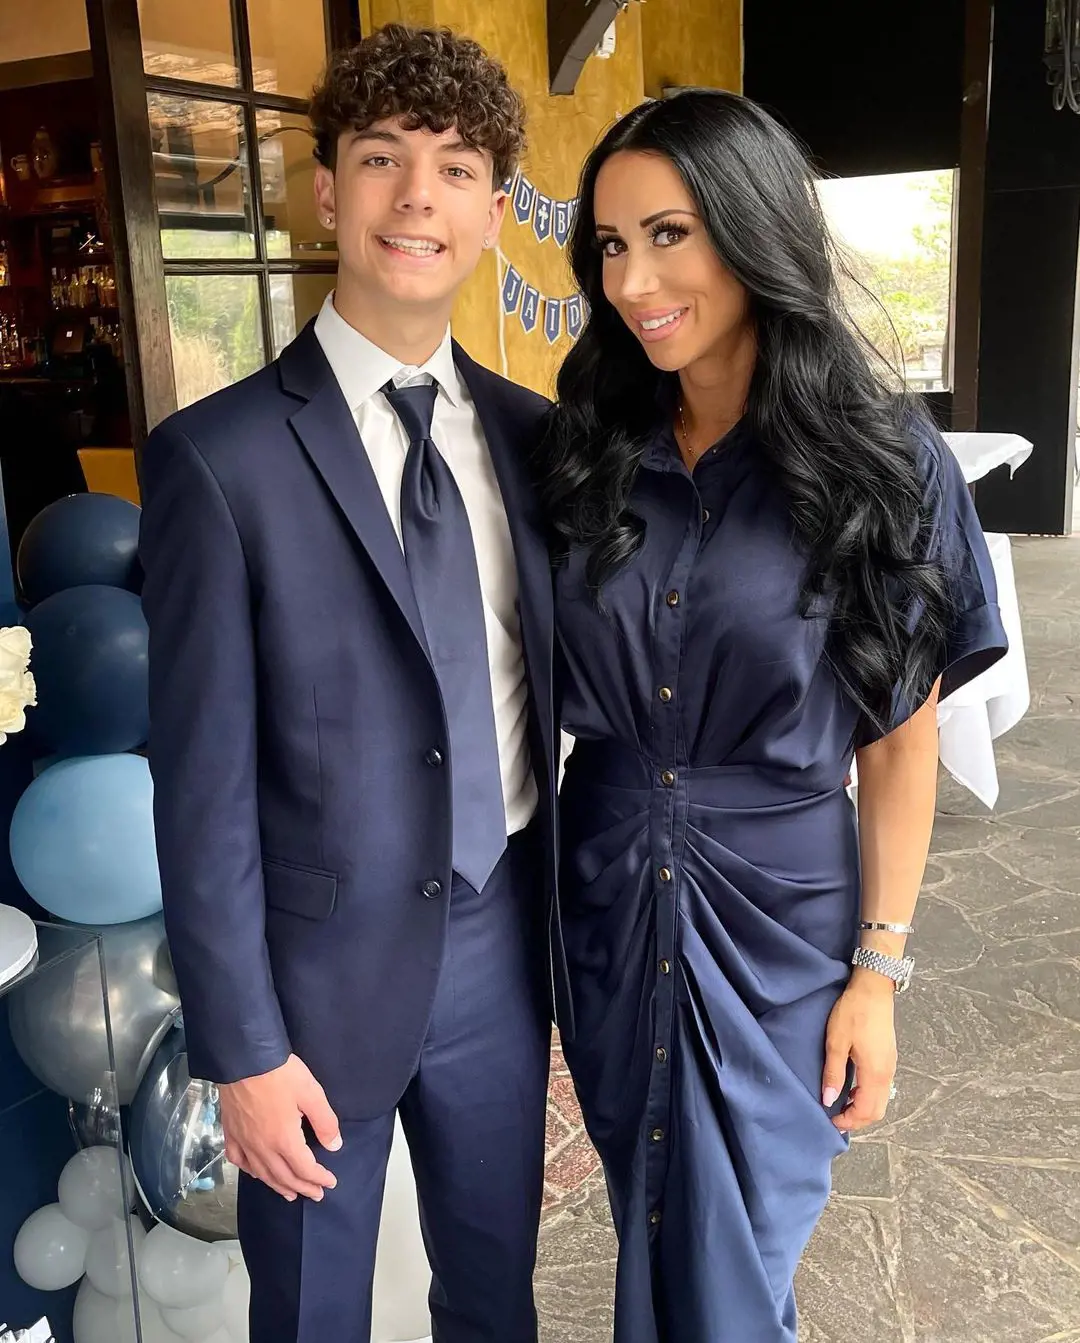 Rachel shares she is adopting her stepson Jaiden as he joined the RHONJ this season as his first television appearance